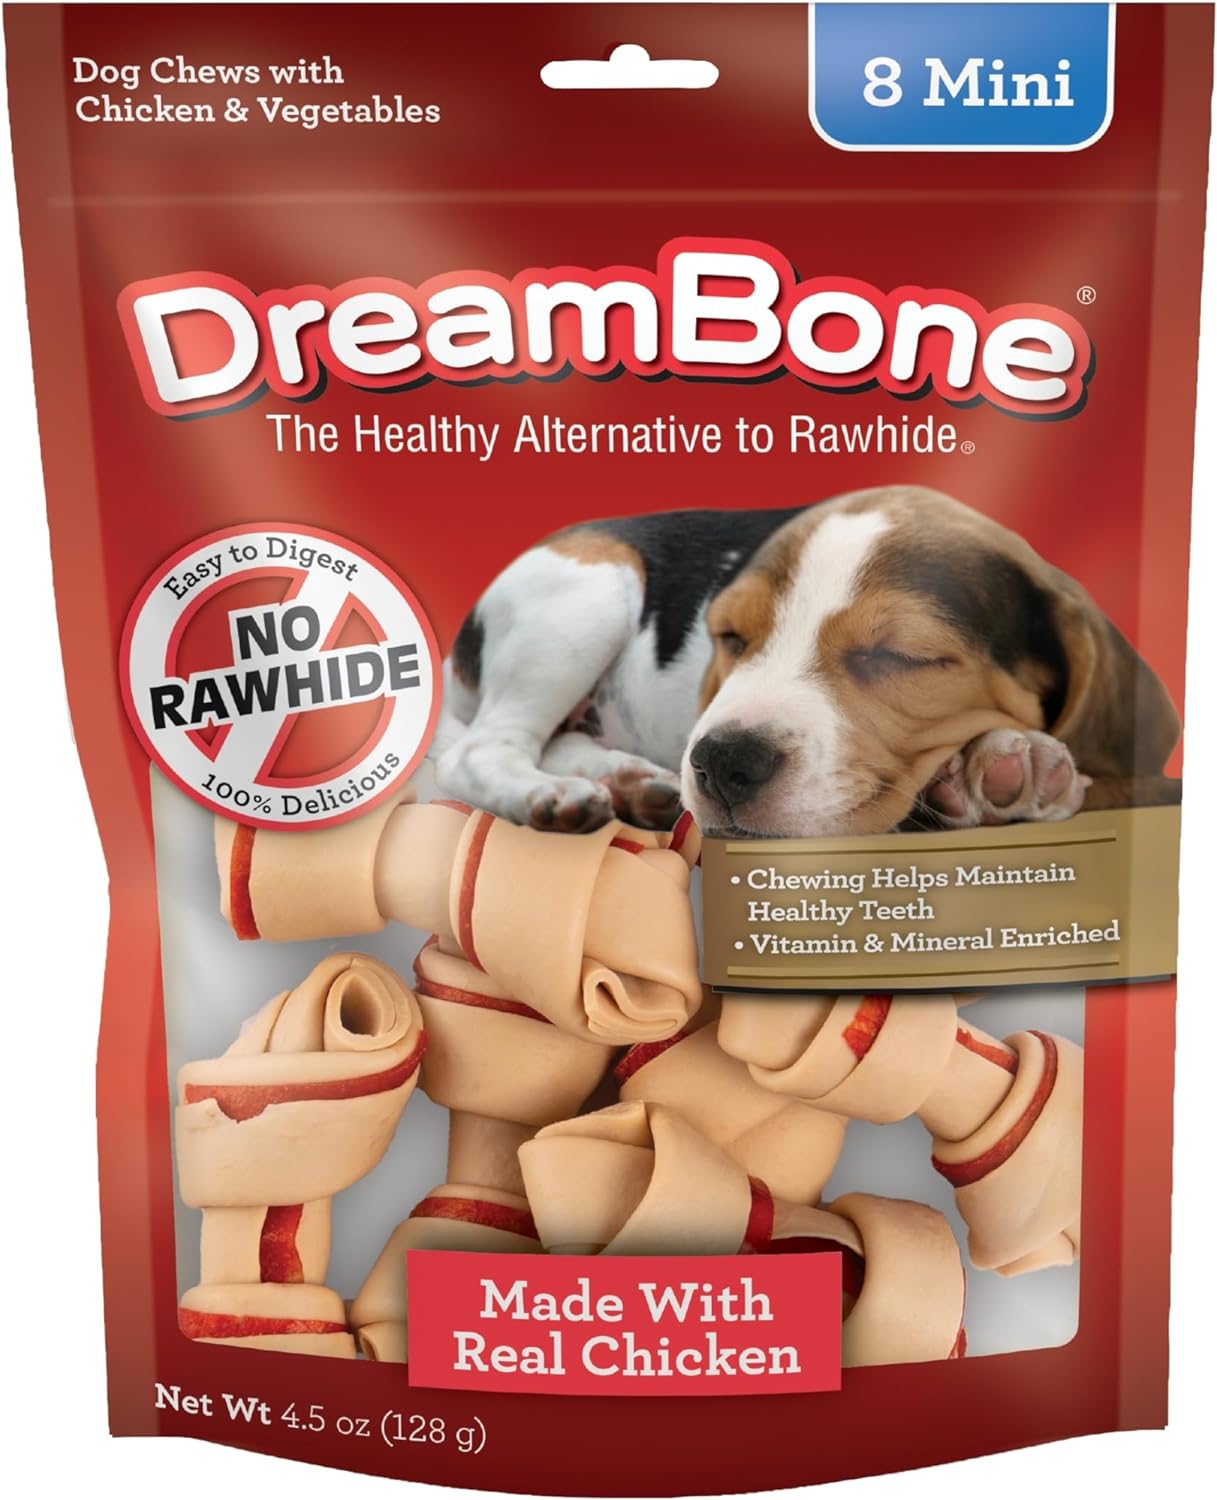 DreamBone Mini Chews, Made with Real Chicken and Vegetables, Rawhide Free Dog Chews, 8 Count